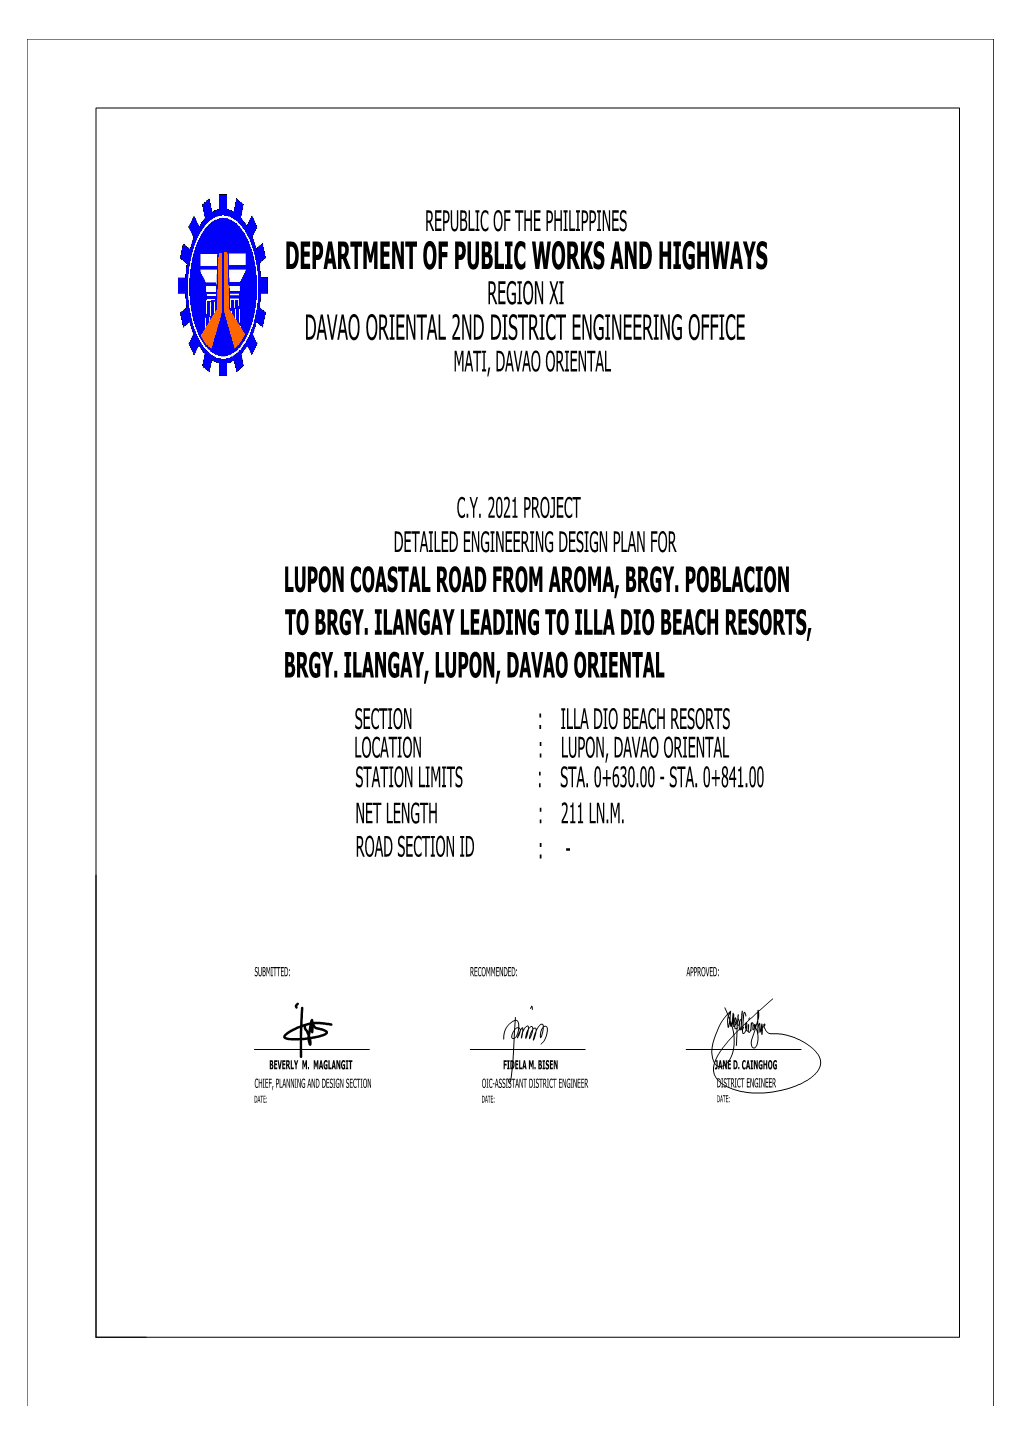 Department of Public Works and Highways Region Xi Davao Oriental 2Nd District Engineering Office Mati, Davao Oriental